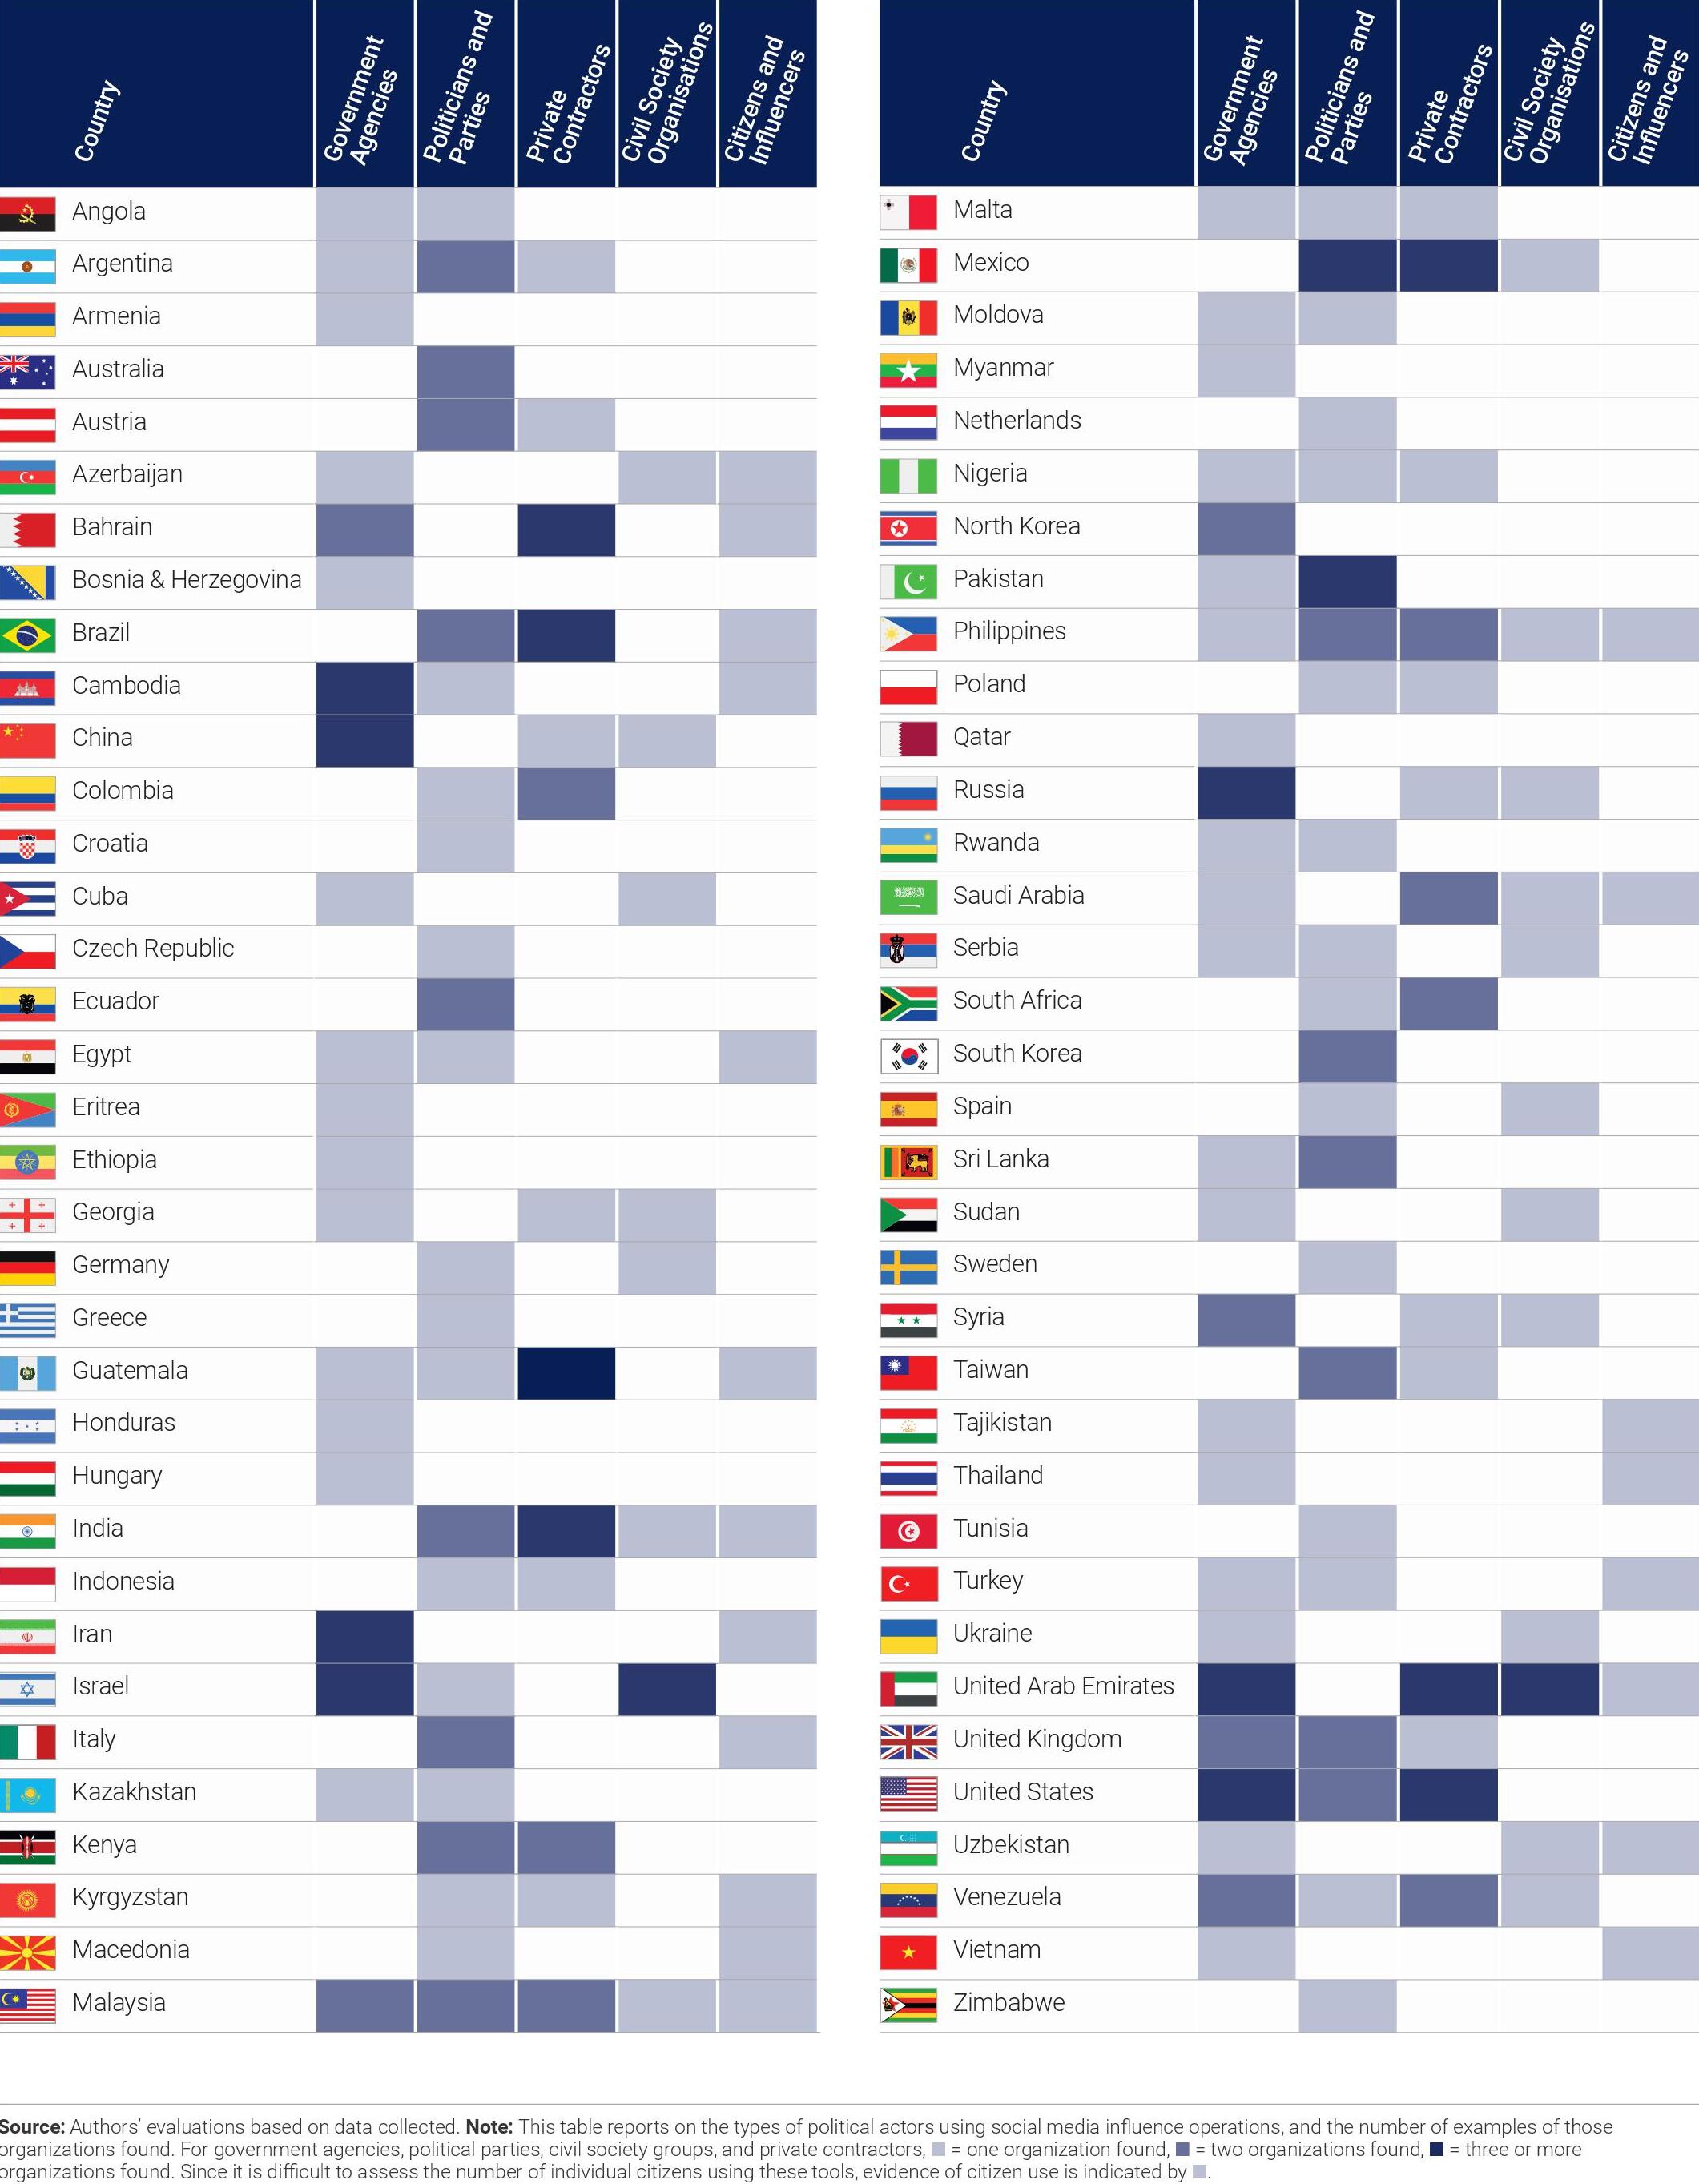 The scale of computational propaganda by country and agency. Source: the report ~